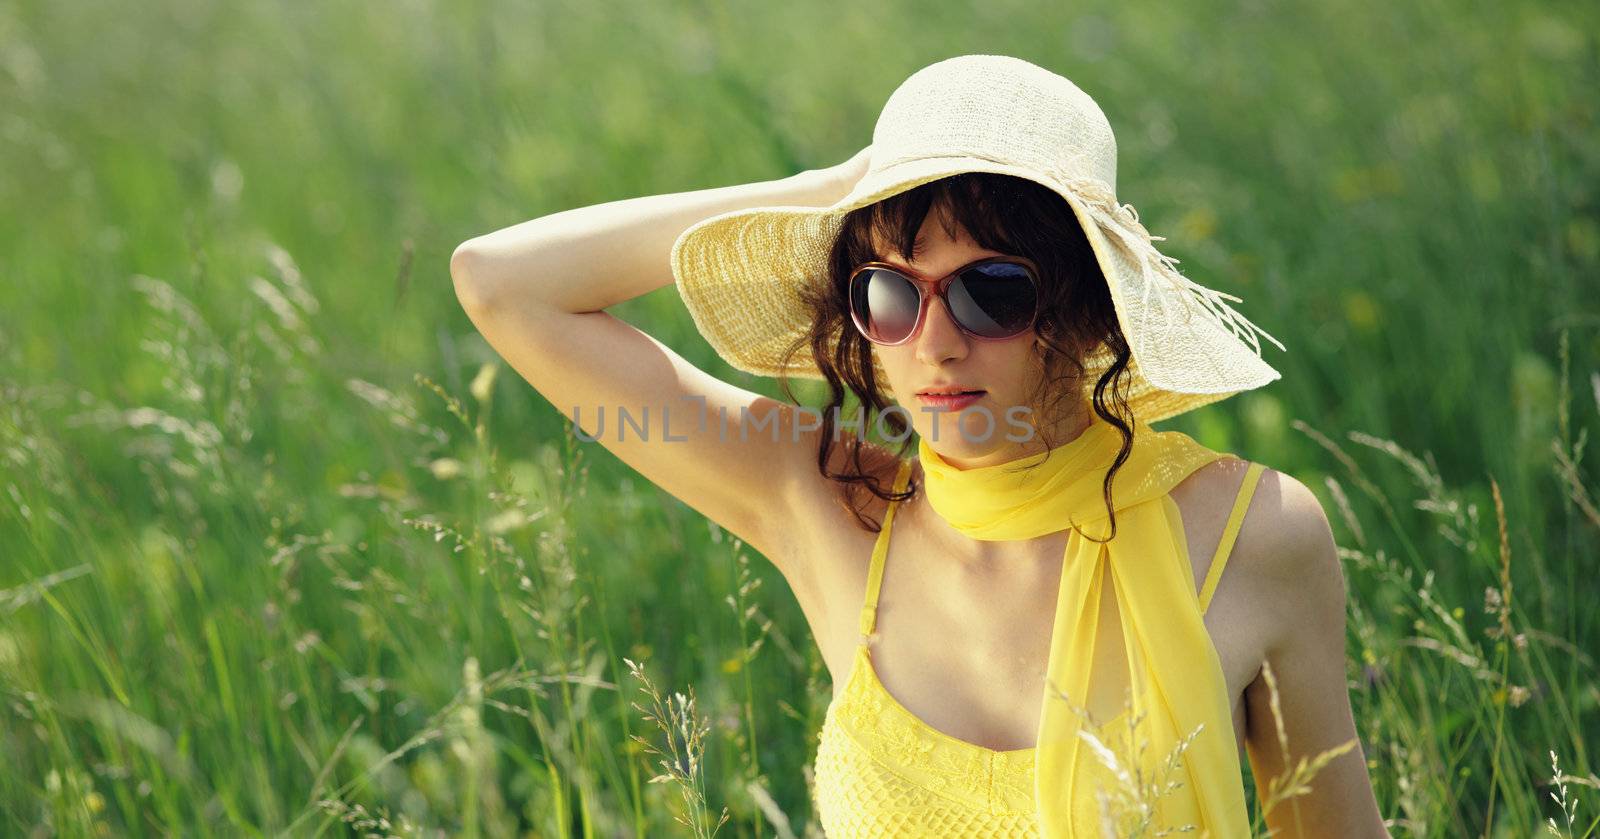 young woman in sunglasses in a flowers field 